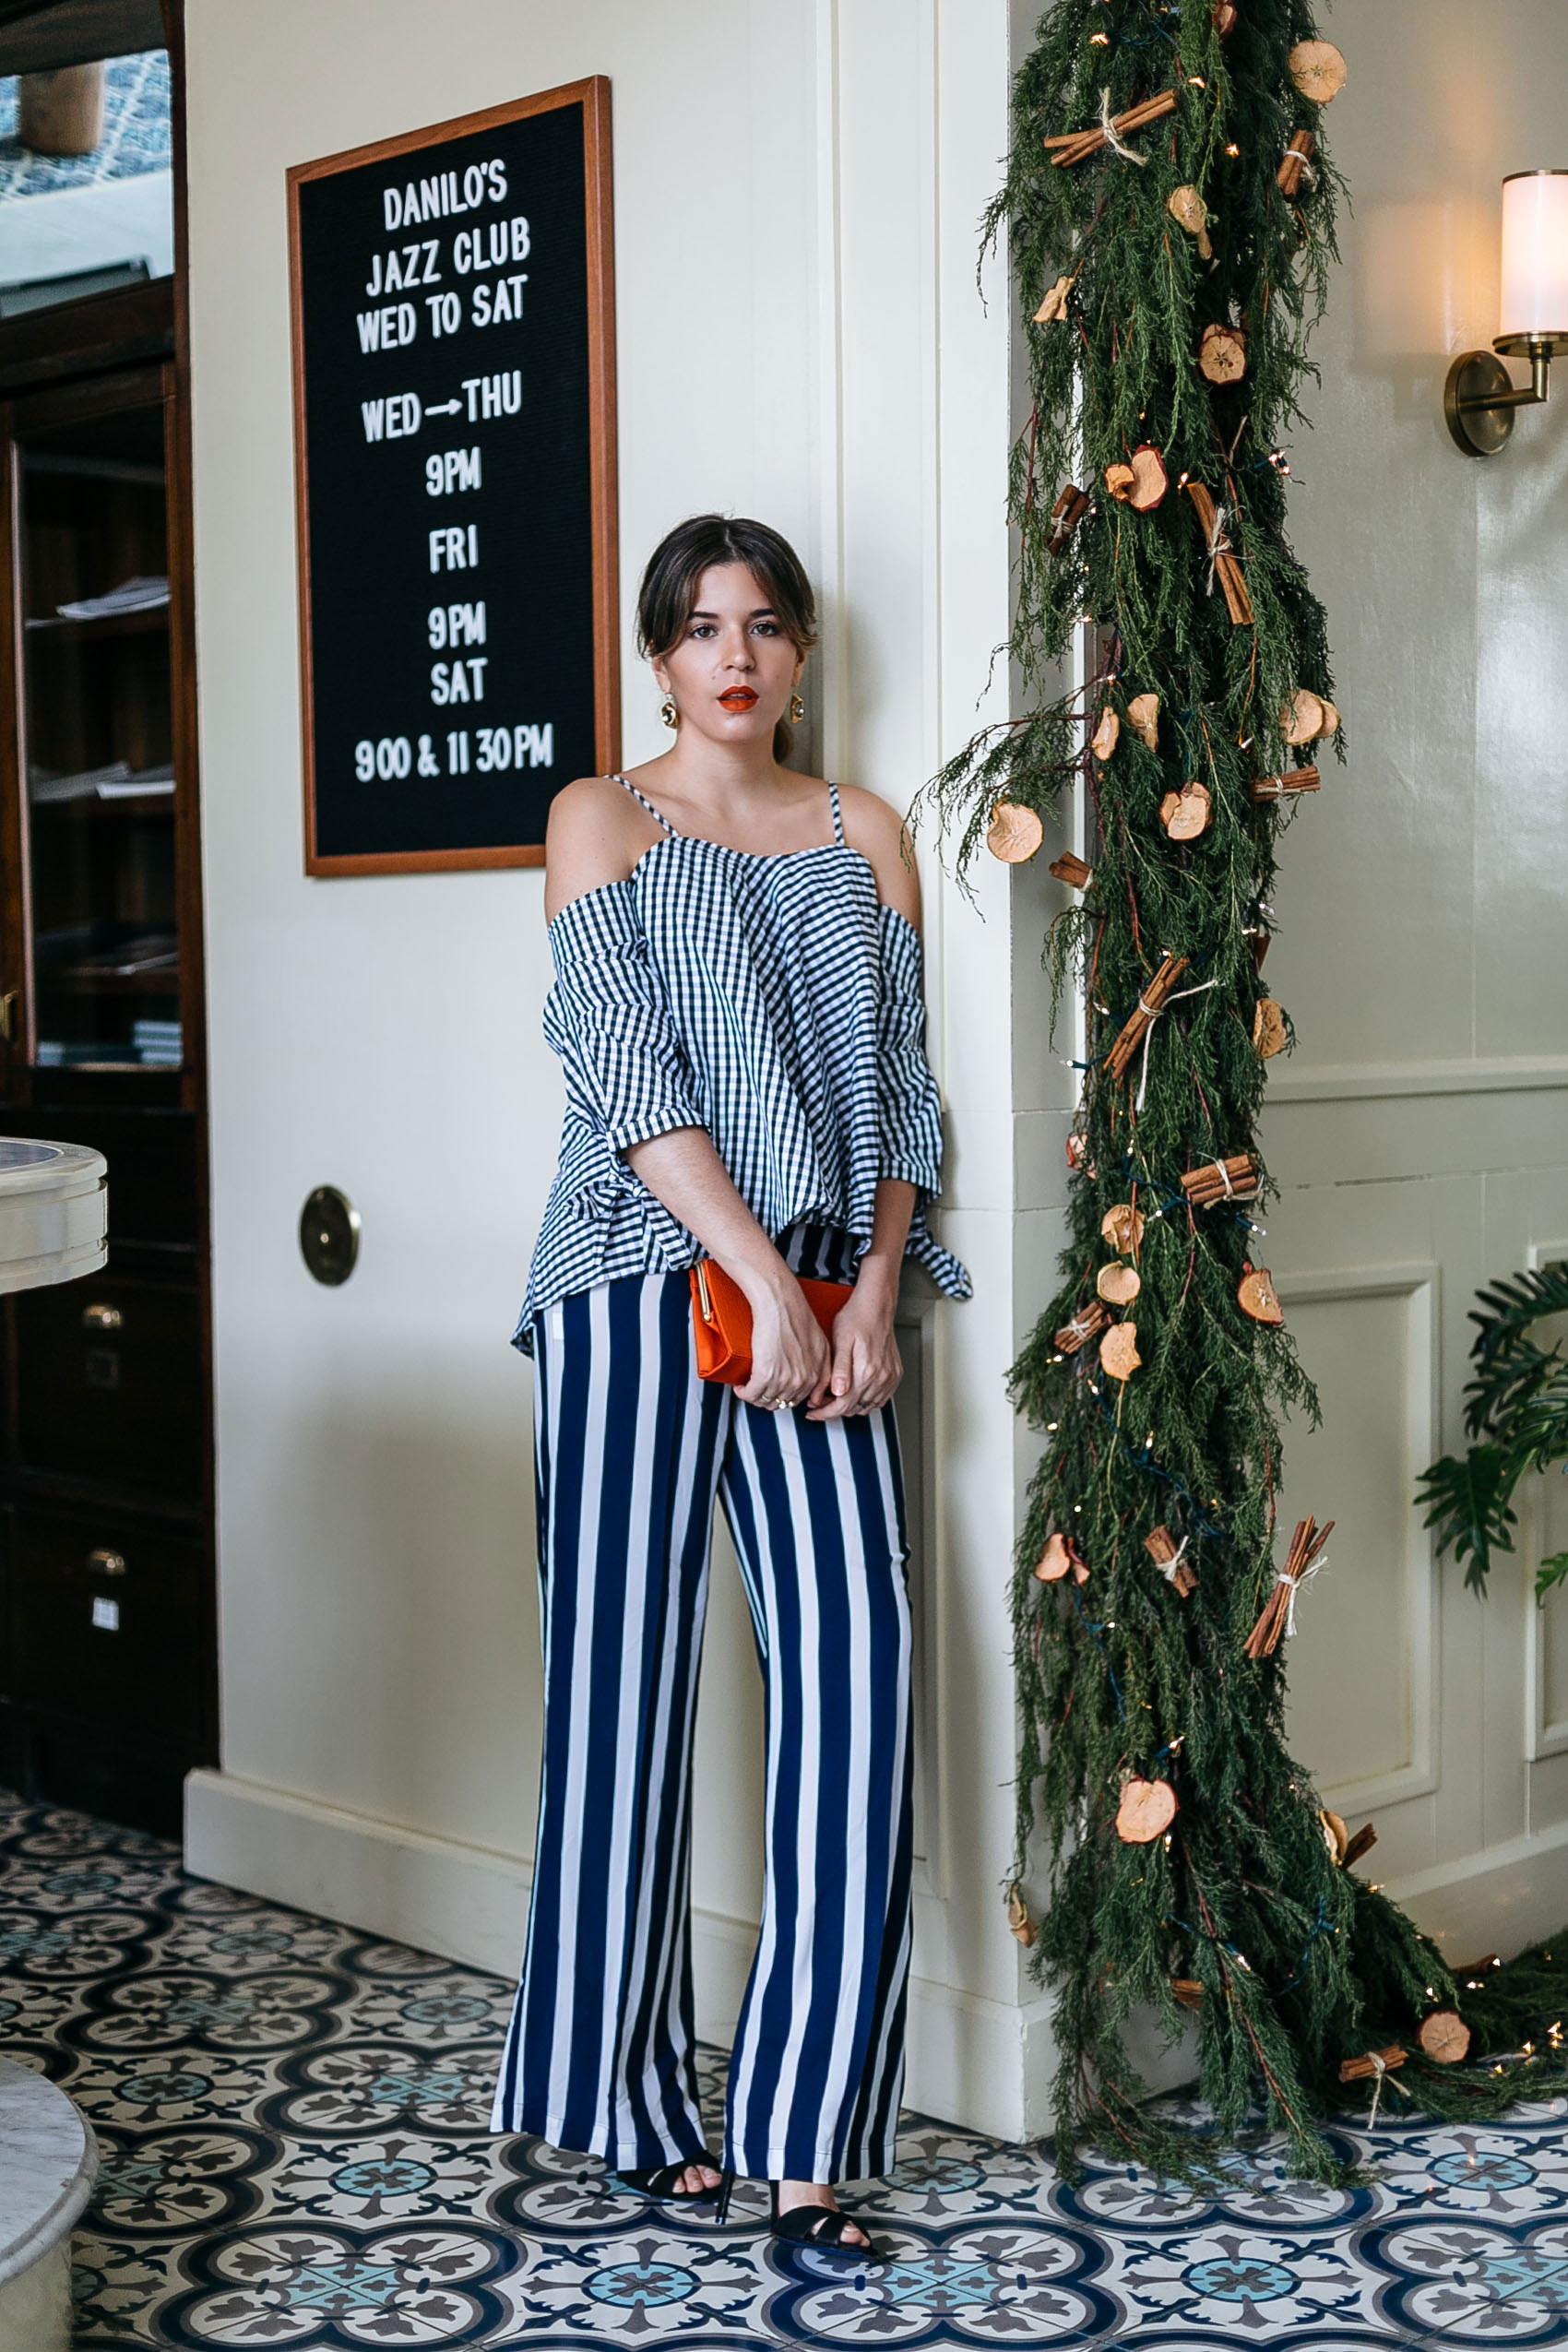 Maristella wears a gingham blouse with stripe wide leg pants and black strappy Schutz sandals